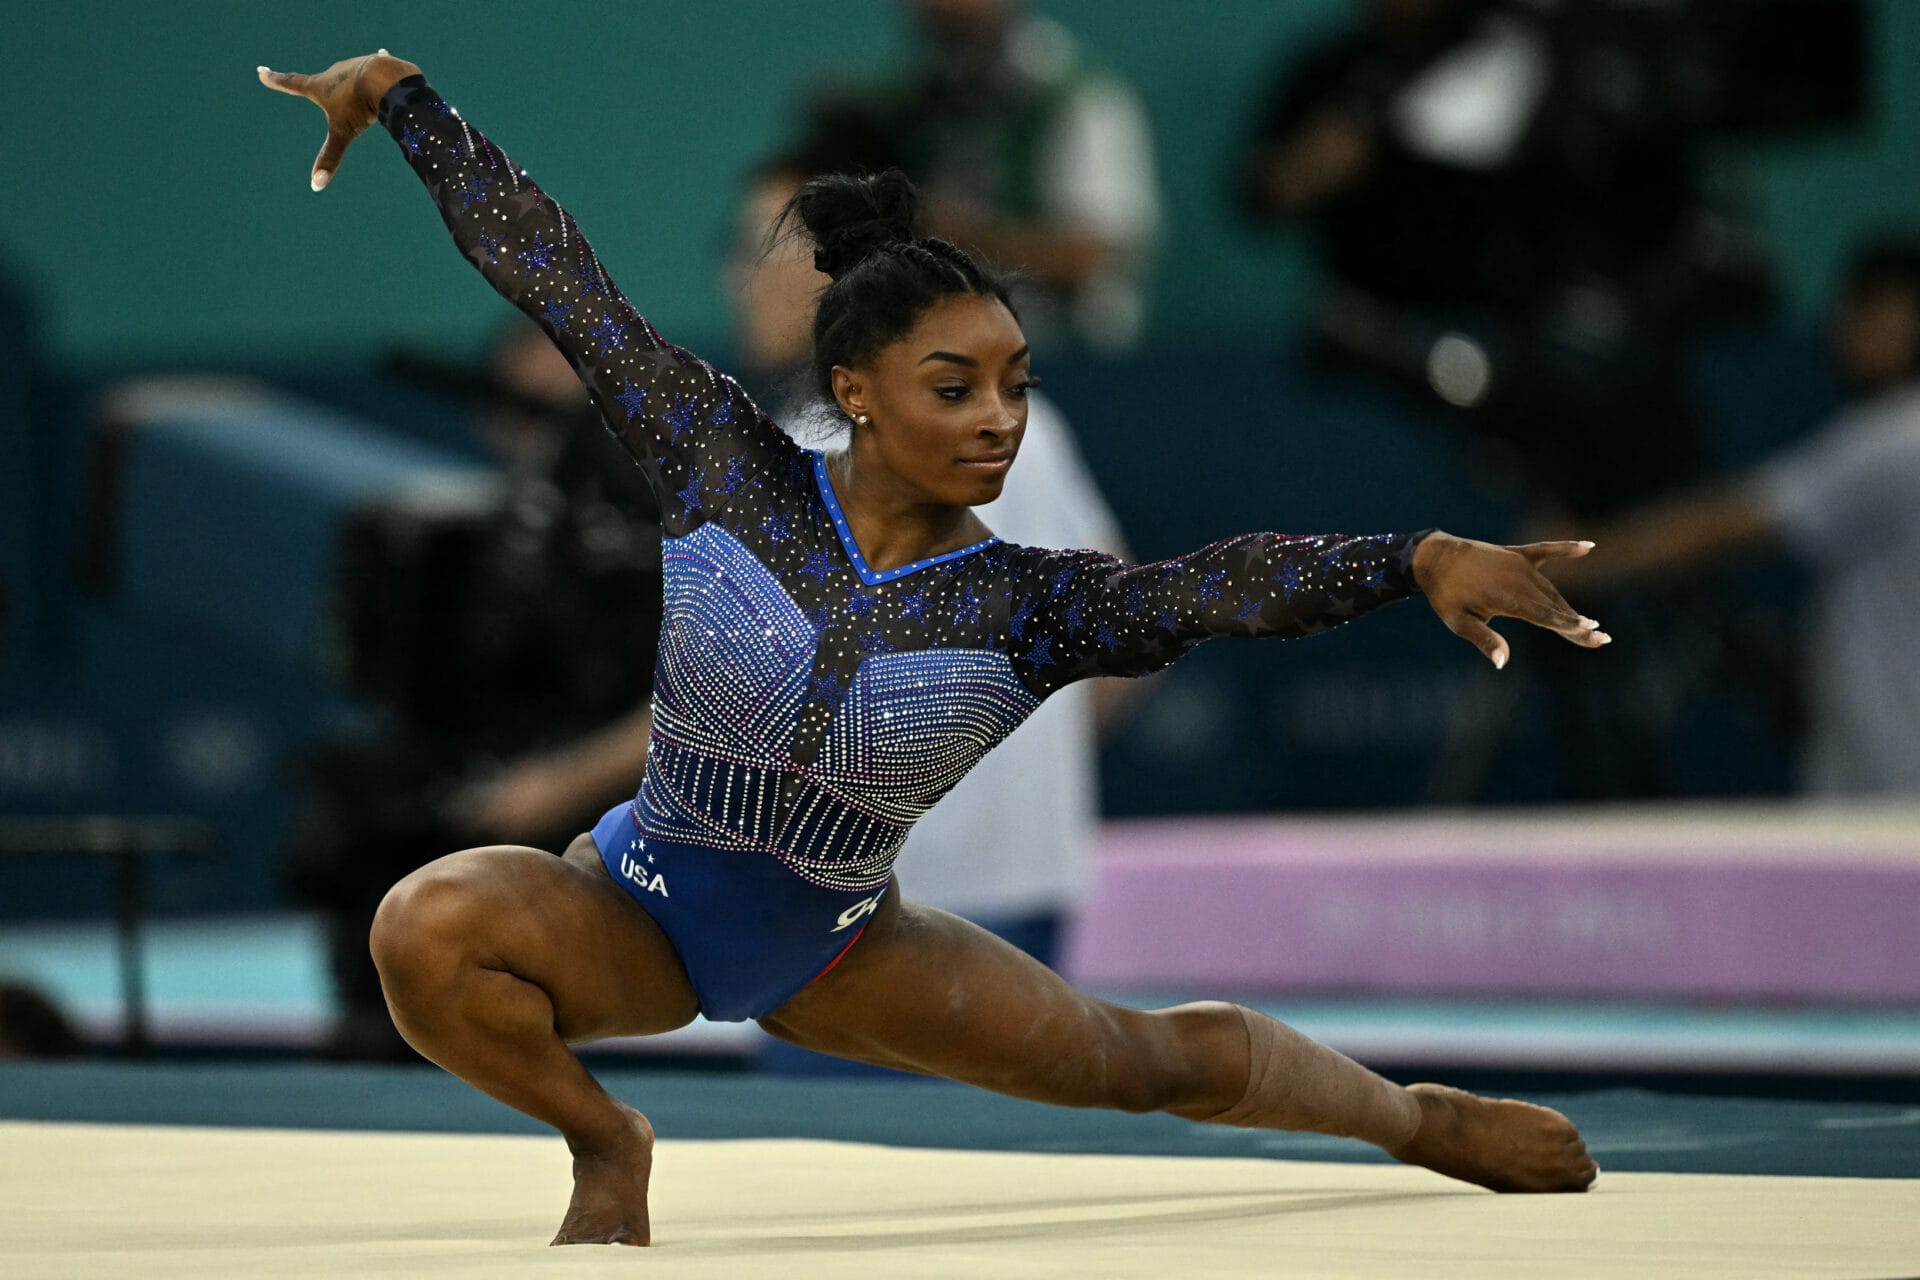 US' Simone Biles competes in the floor exercise event of the artistic gymnastics women's all around final during the Paris 2024 Olympic Games at the Bercy Arena in Paris, on August 1, 2024. (Photo by Lionel BONAVENTURE / AFP) (Photo by LIONEL BONAVENTURE/AFP via Getty Images)